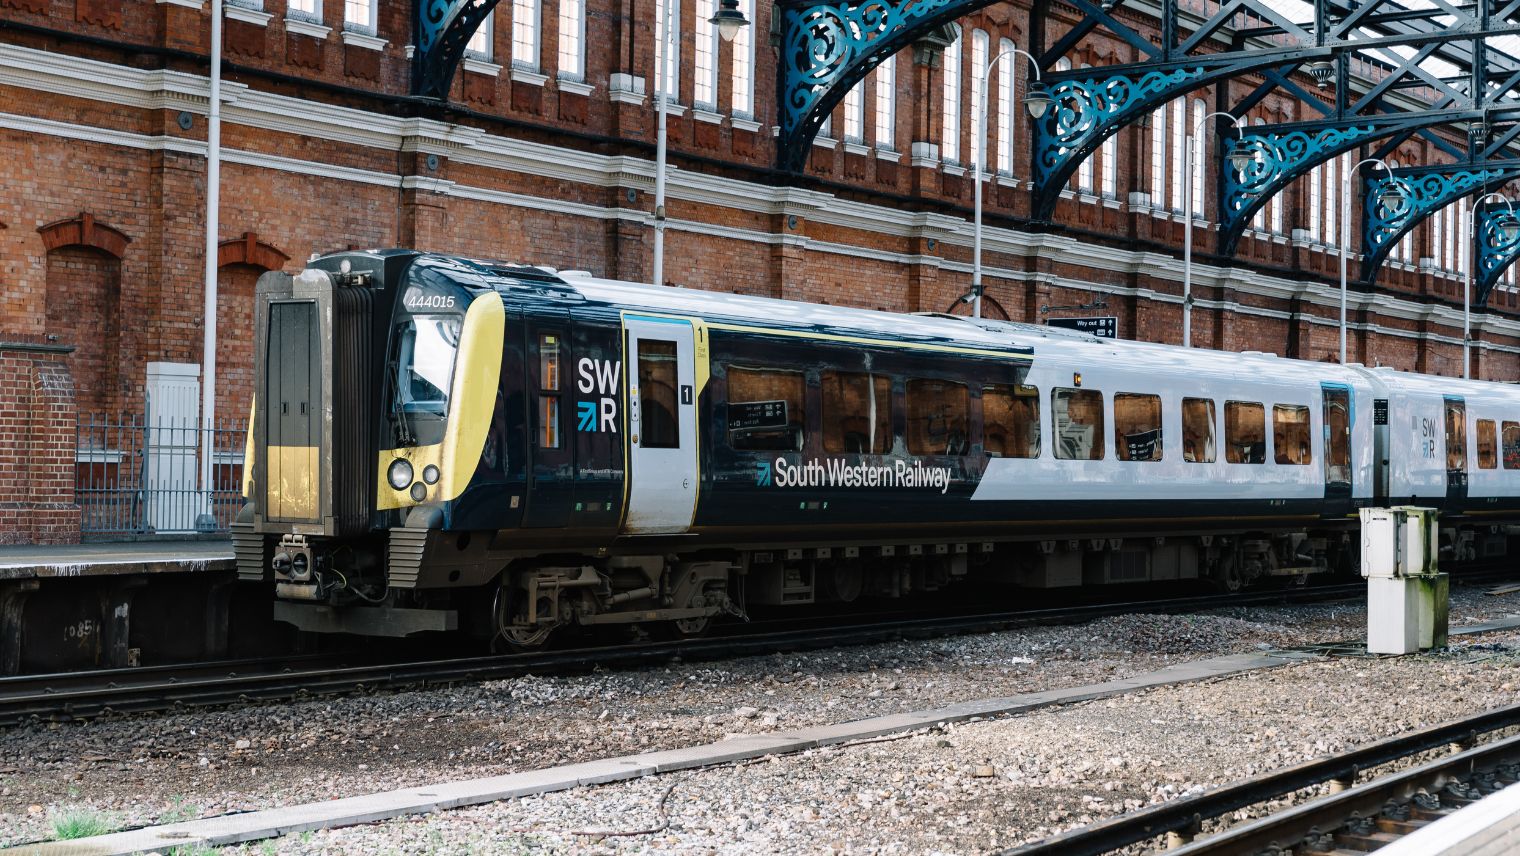 Two direct trains per hour will once again run between Weymouth and London Waterloo, following the introduction of South Western Railway’s new timetable on Sunday 15th May